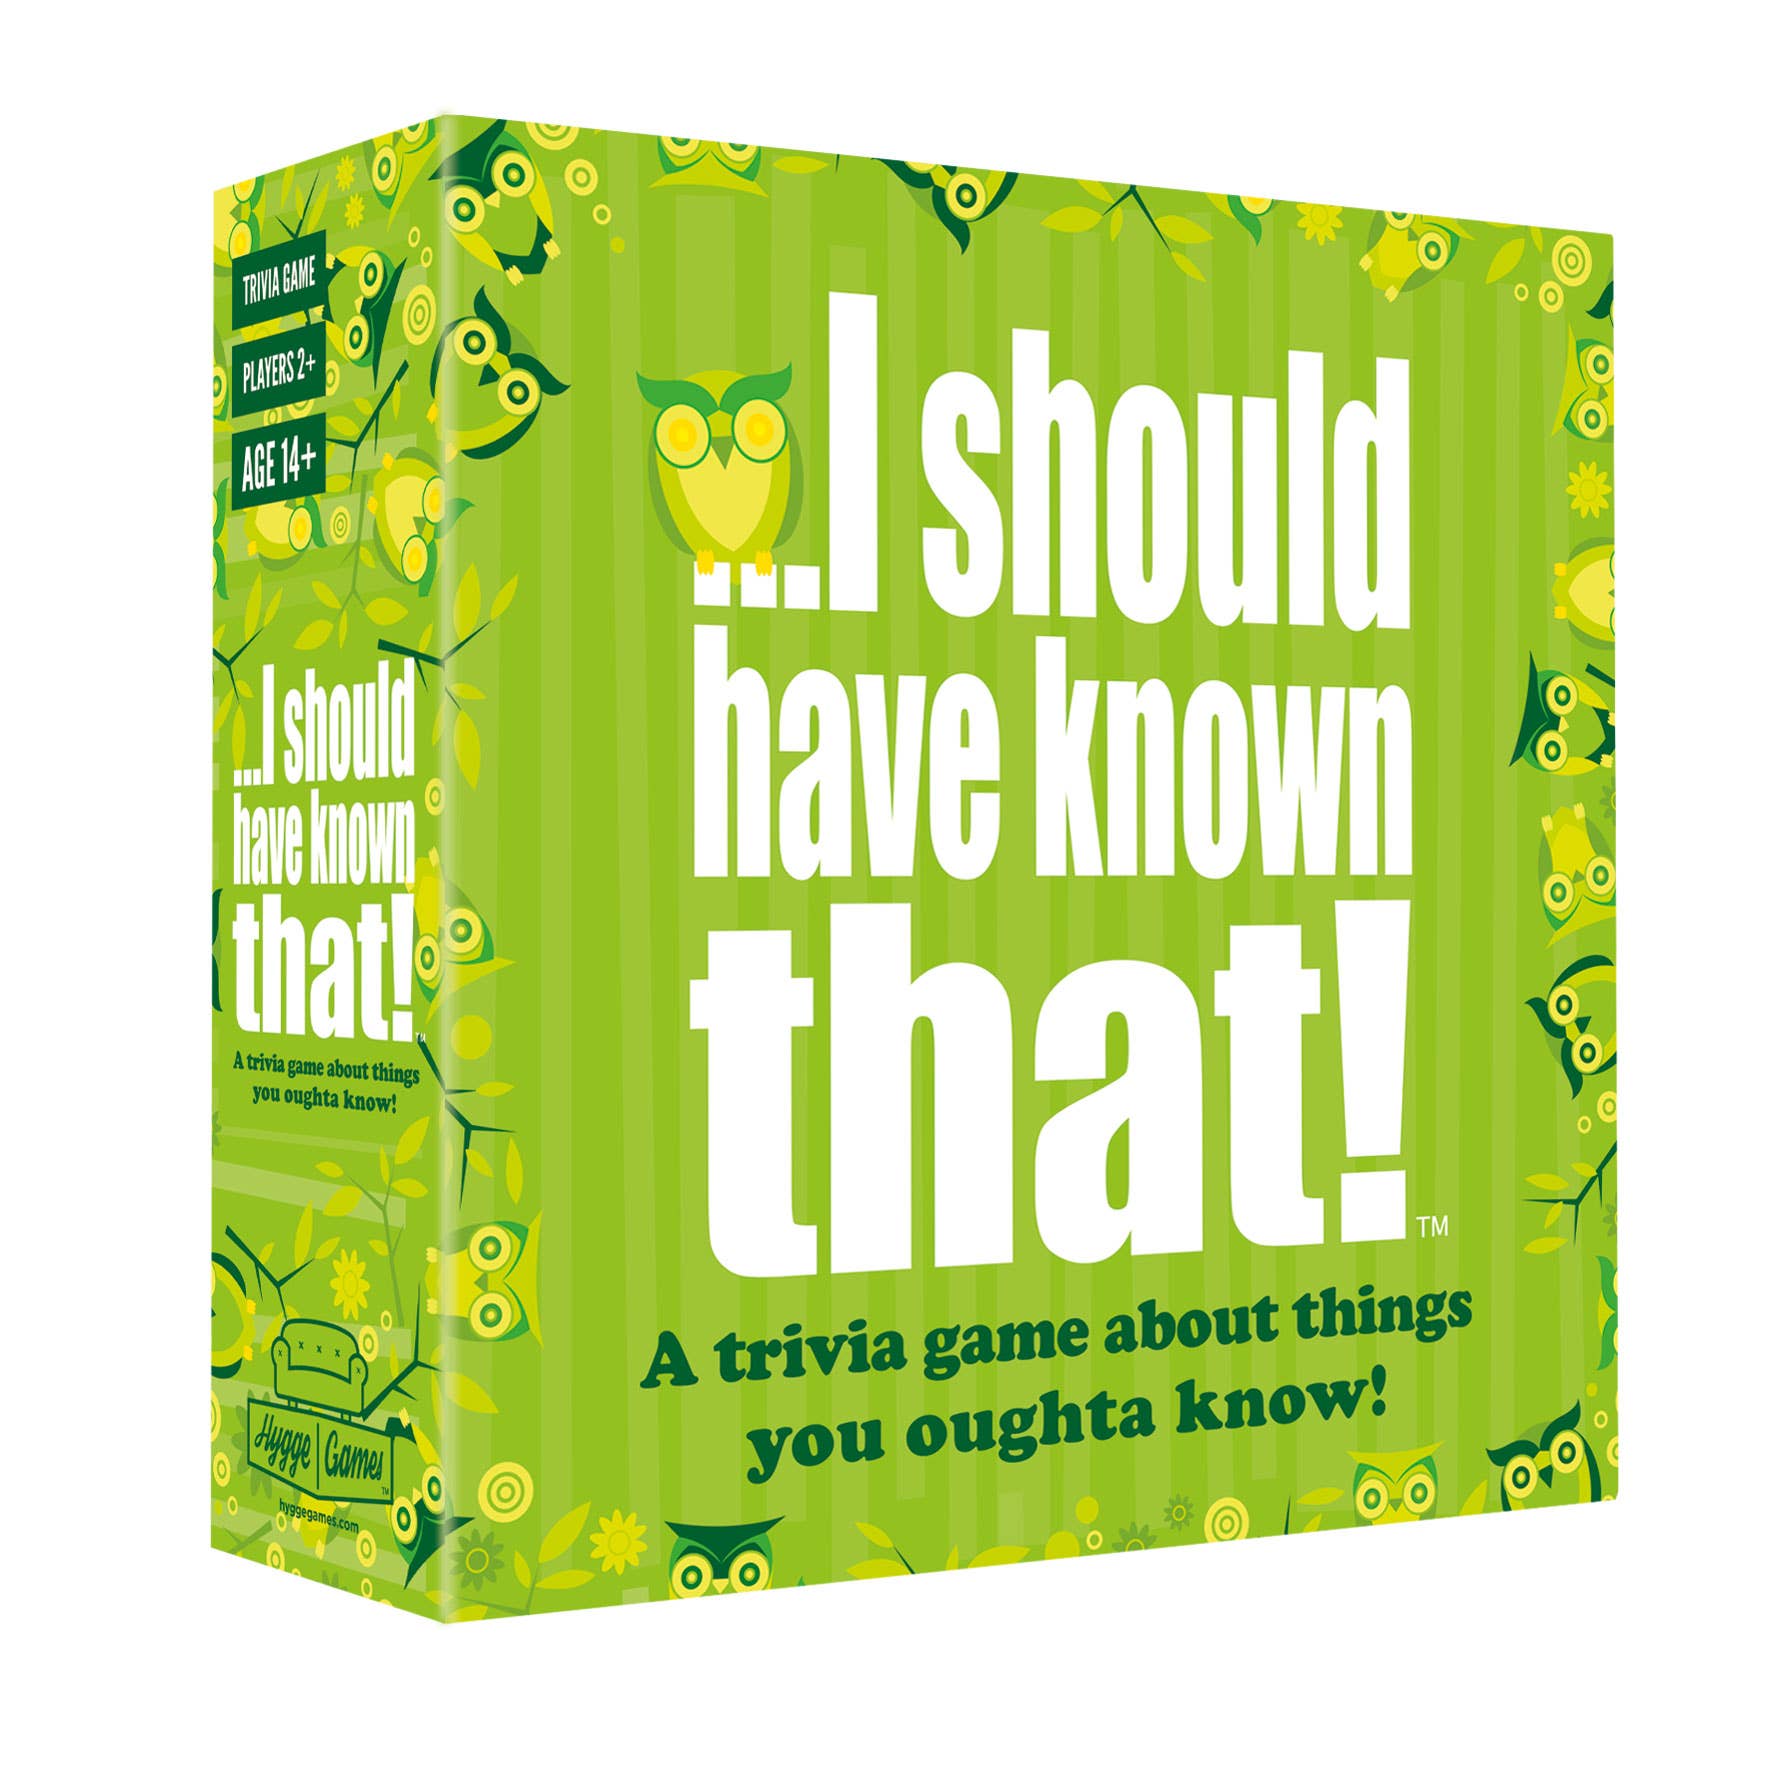 I should have known that! Trivia Game